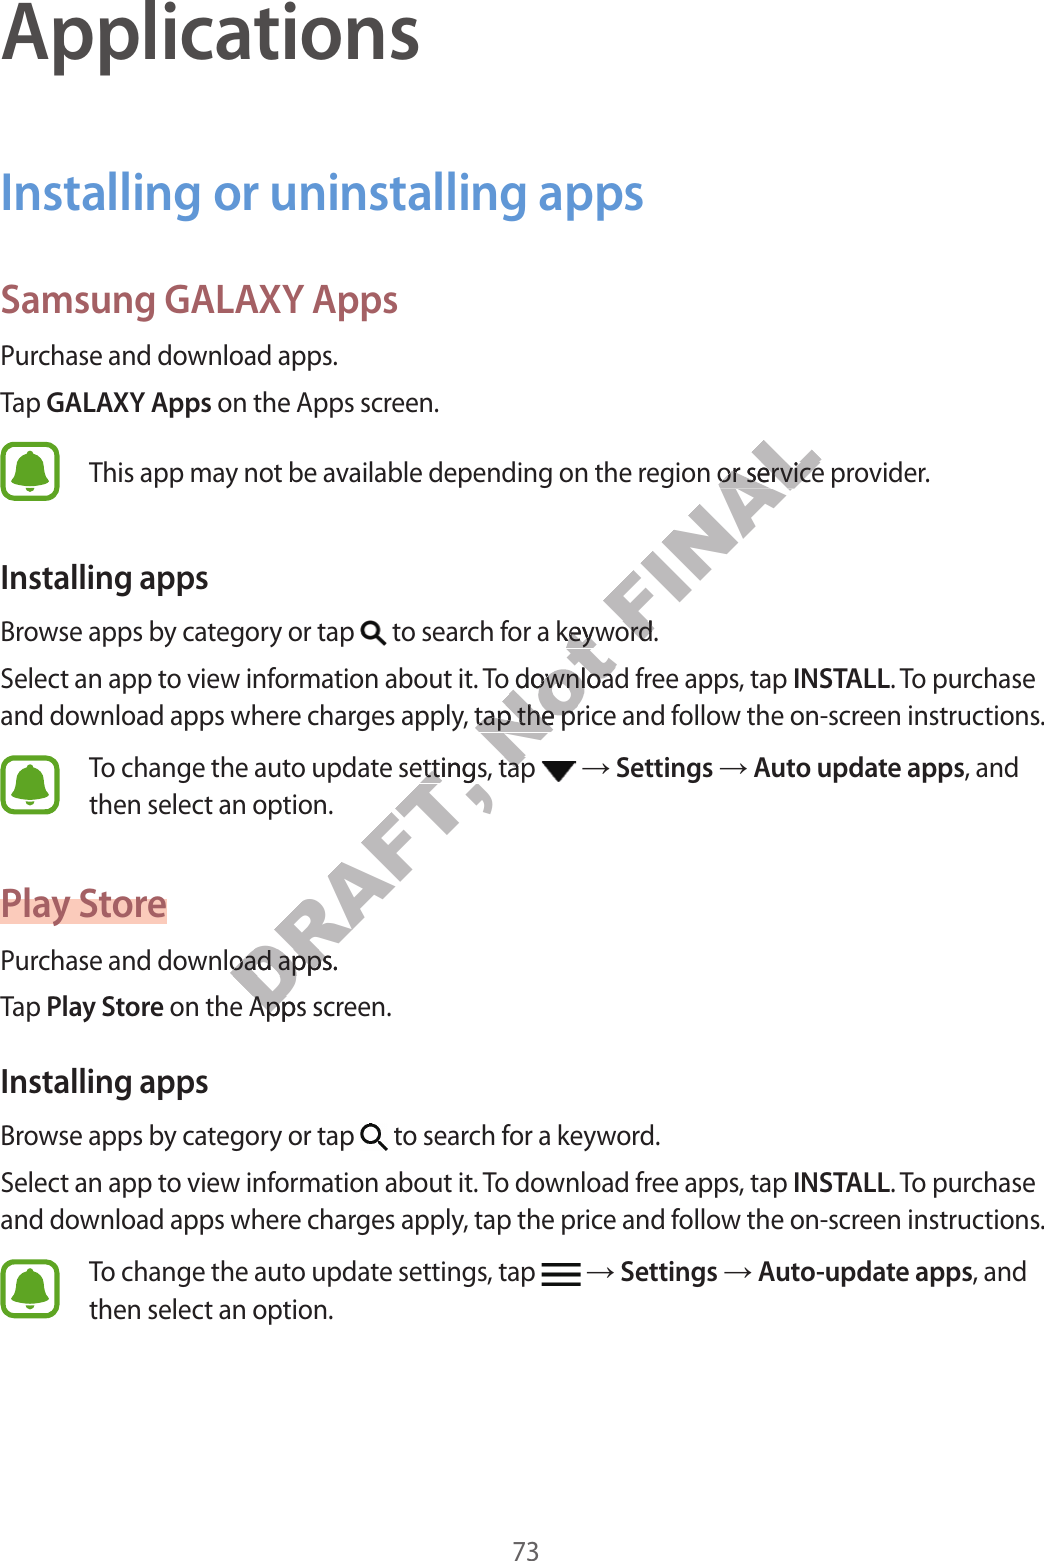 73ApplicationsInstalling or uninstalling appsSamsung GALAXY AppsPurchase and download apps.Tap GALAXY Apps on the Apps screen.This app may not be available depending on the region or service provider.Installing appsBrowse apps by category or tap   to search for a keyword.Select an app to view information about it. To download free apps, tap INSTALL. To purchase and download apps where charges apply, tap the price and follow the on-screen instructions.To change the auto update settings, tap   ĺ Settings ĺ Auto update apps, and then select an option.Play StorePurchase and download apps.Tap Play Store on the Apps screen.Installing appsBrowse apps by category or tap   to search for a keyword.Select an app to view information about it. To download free apps, tap INSTALL. To purchase and download apps where charges apply, tap the price and follow the on-screen instructions.To change the auto update settings, tap   ĺ Settings ĺ Auto-update apps, and then select an option.DRAFT, e settings, tap e settingswnload apps.wnload appsDRAFT,  on the Apps scr on the Apps scrNot or a keywor a keyw. To download fr. To download frges apply, tap the prges apply, tap the pre settings, tap e settings, tap FINALion or service prion or service prword.word.